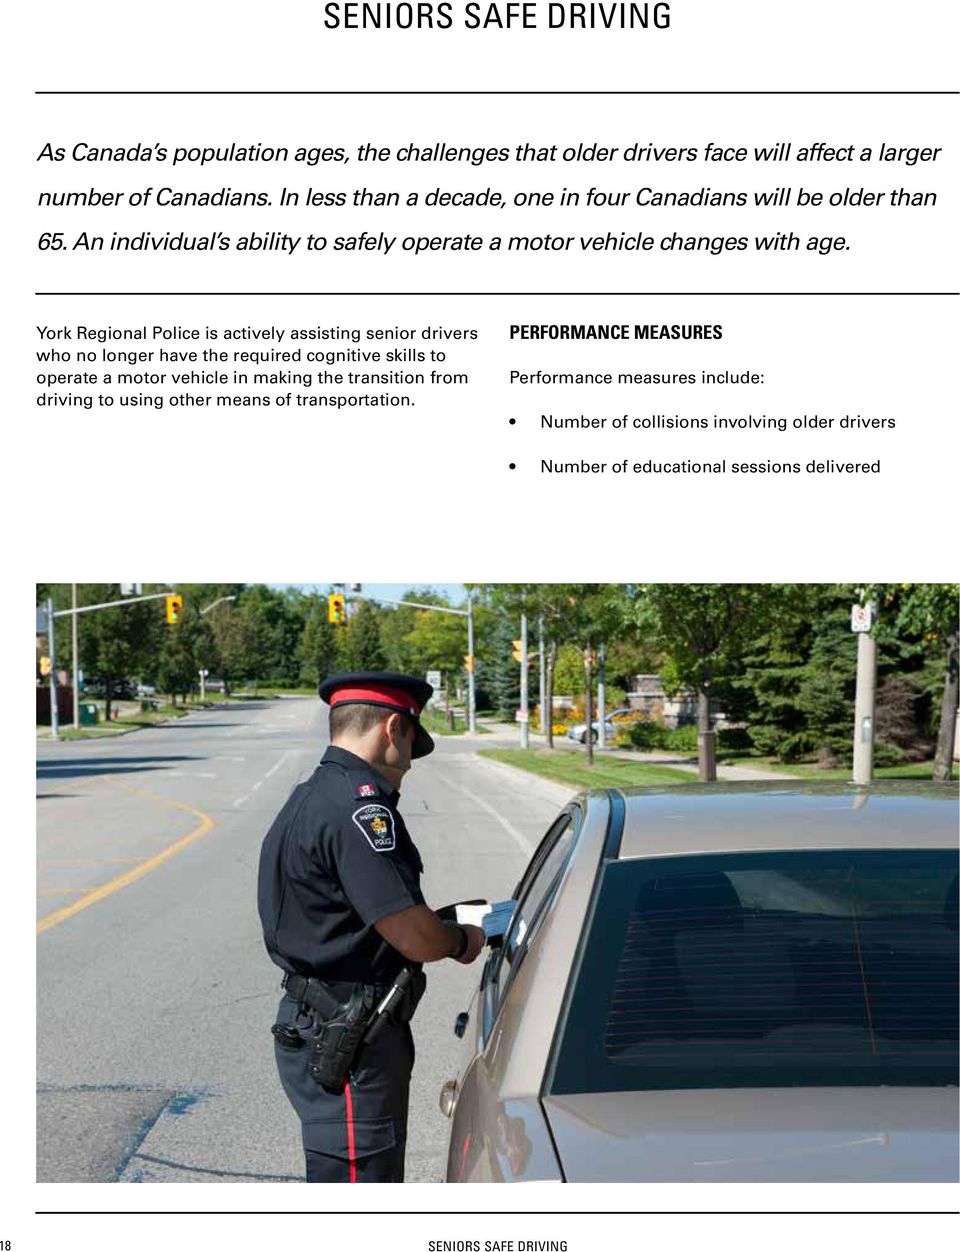 York Regional Police is actively assisting senior drivers who no longer have the required cognitive skills to operate a motor vehicle in making the transition